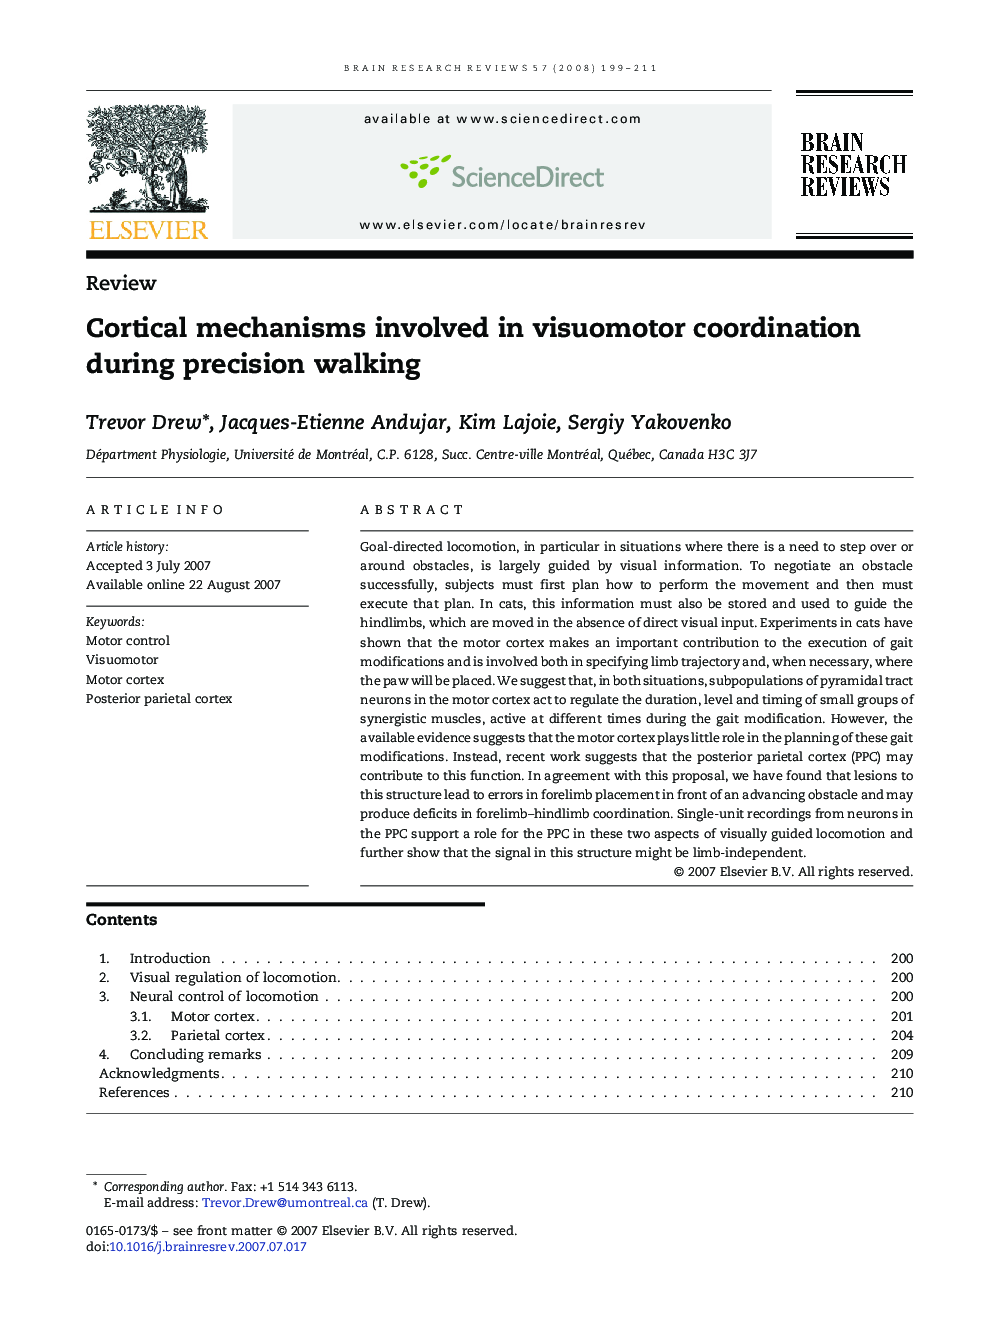 Cortical mechanisms involved in visuomotor coordination during precision walking